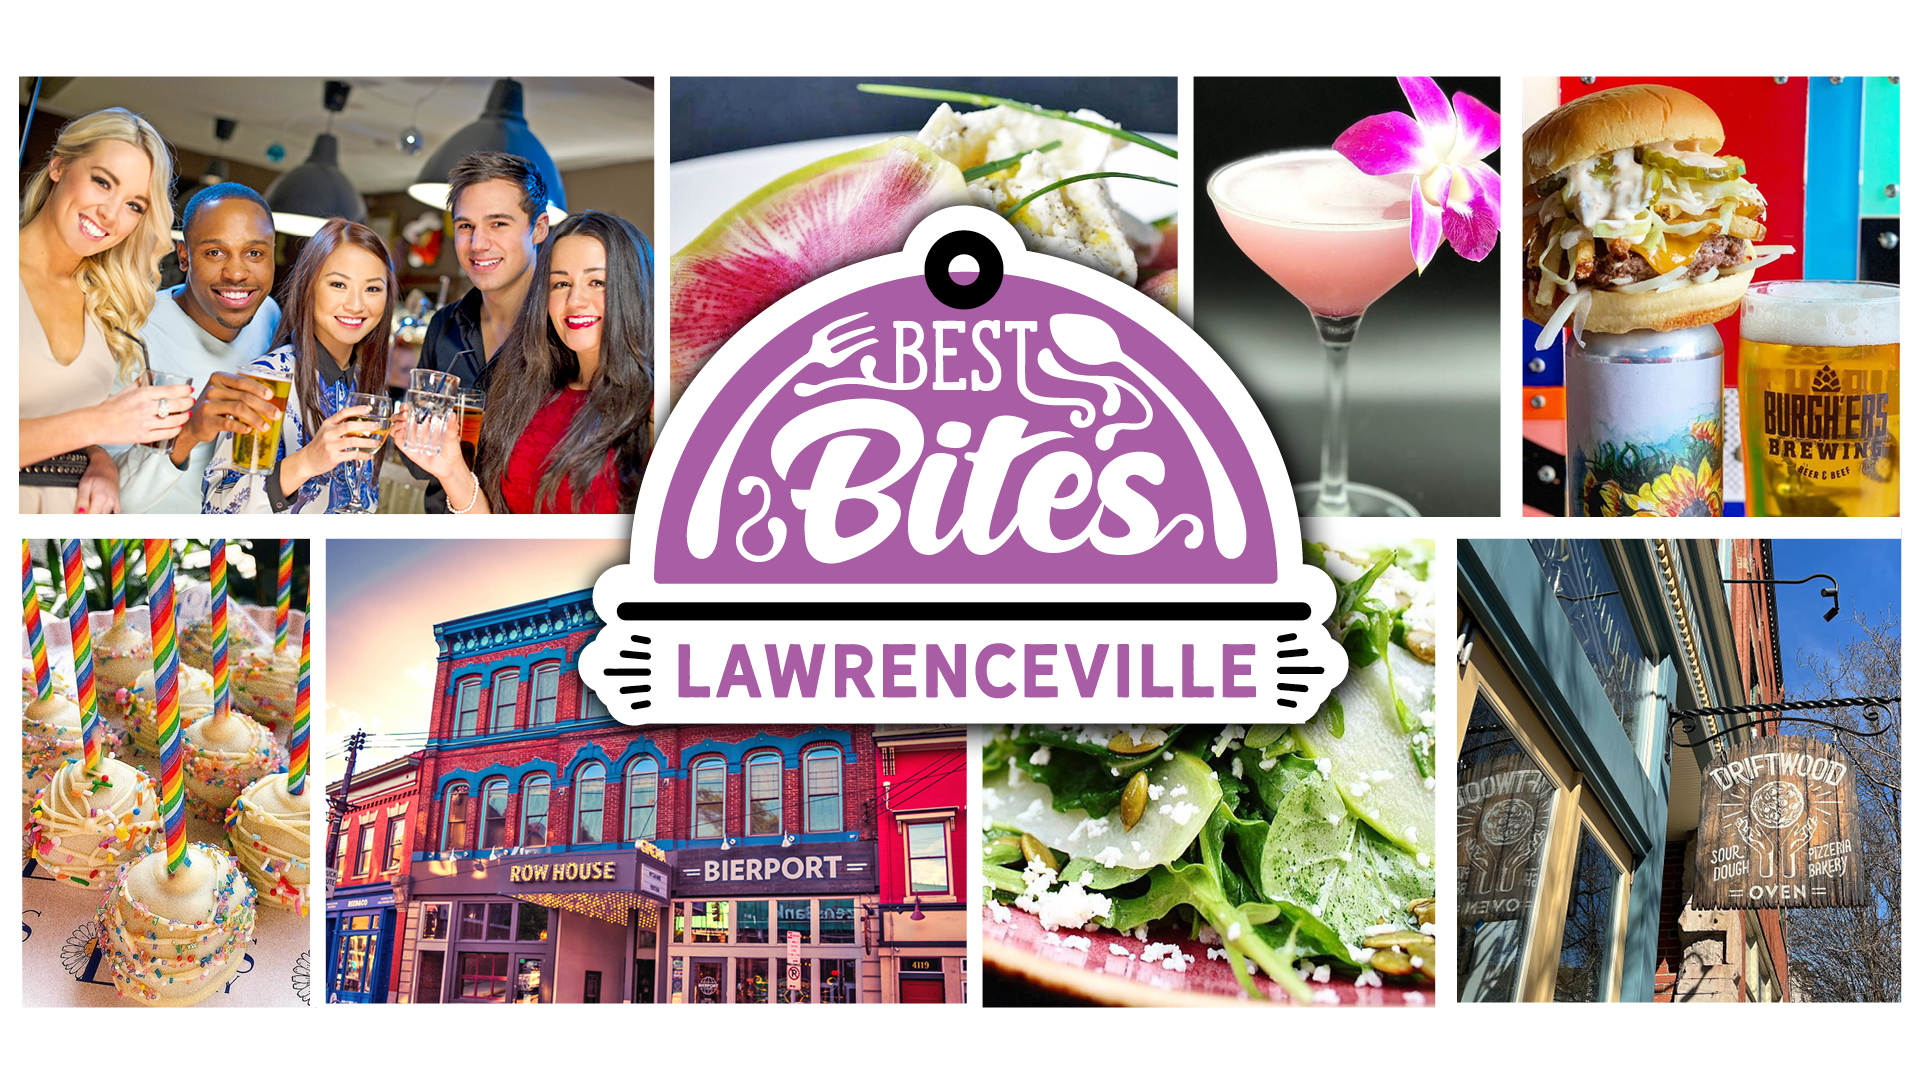 A graphic that says "Best Bites Lawrenceville" and features photos of foods, drinks, and a few Lawrenceville restaurants.